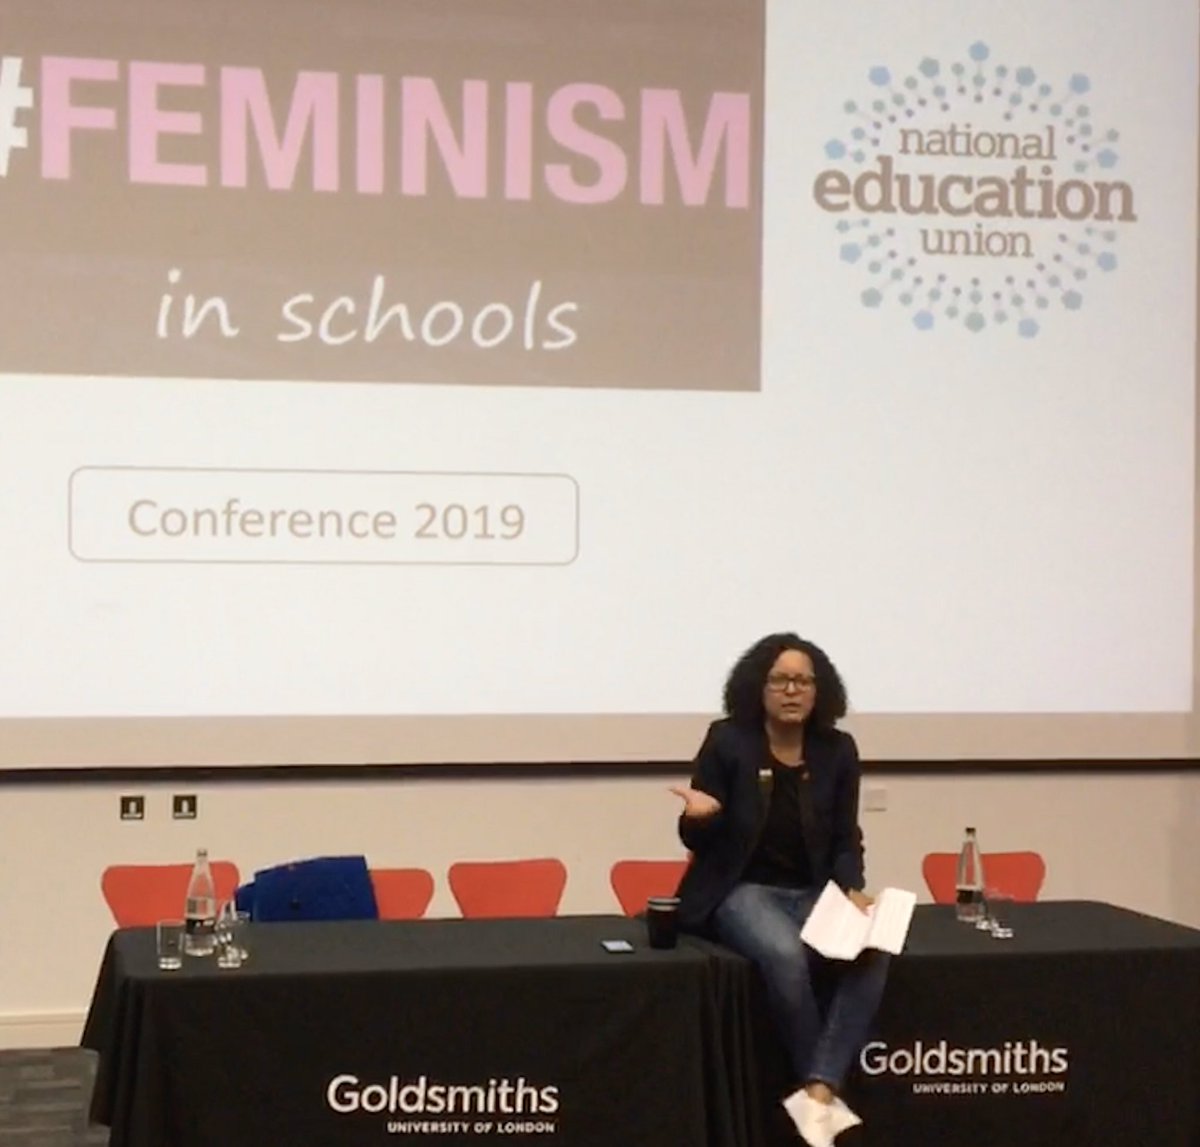 “For @WEP_UK political activism is our engine & feminism is our fuel. We want to agitate & influence, to change the things we can’t accept. Let’s not drop the mic. Let’s pass the mic”: @ManduReid, first person of colour to lead a UK political party, at #FeminismInSchools #WomenEd